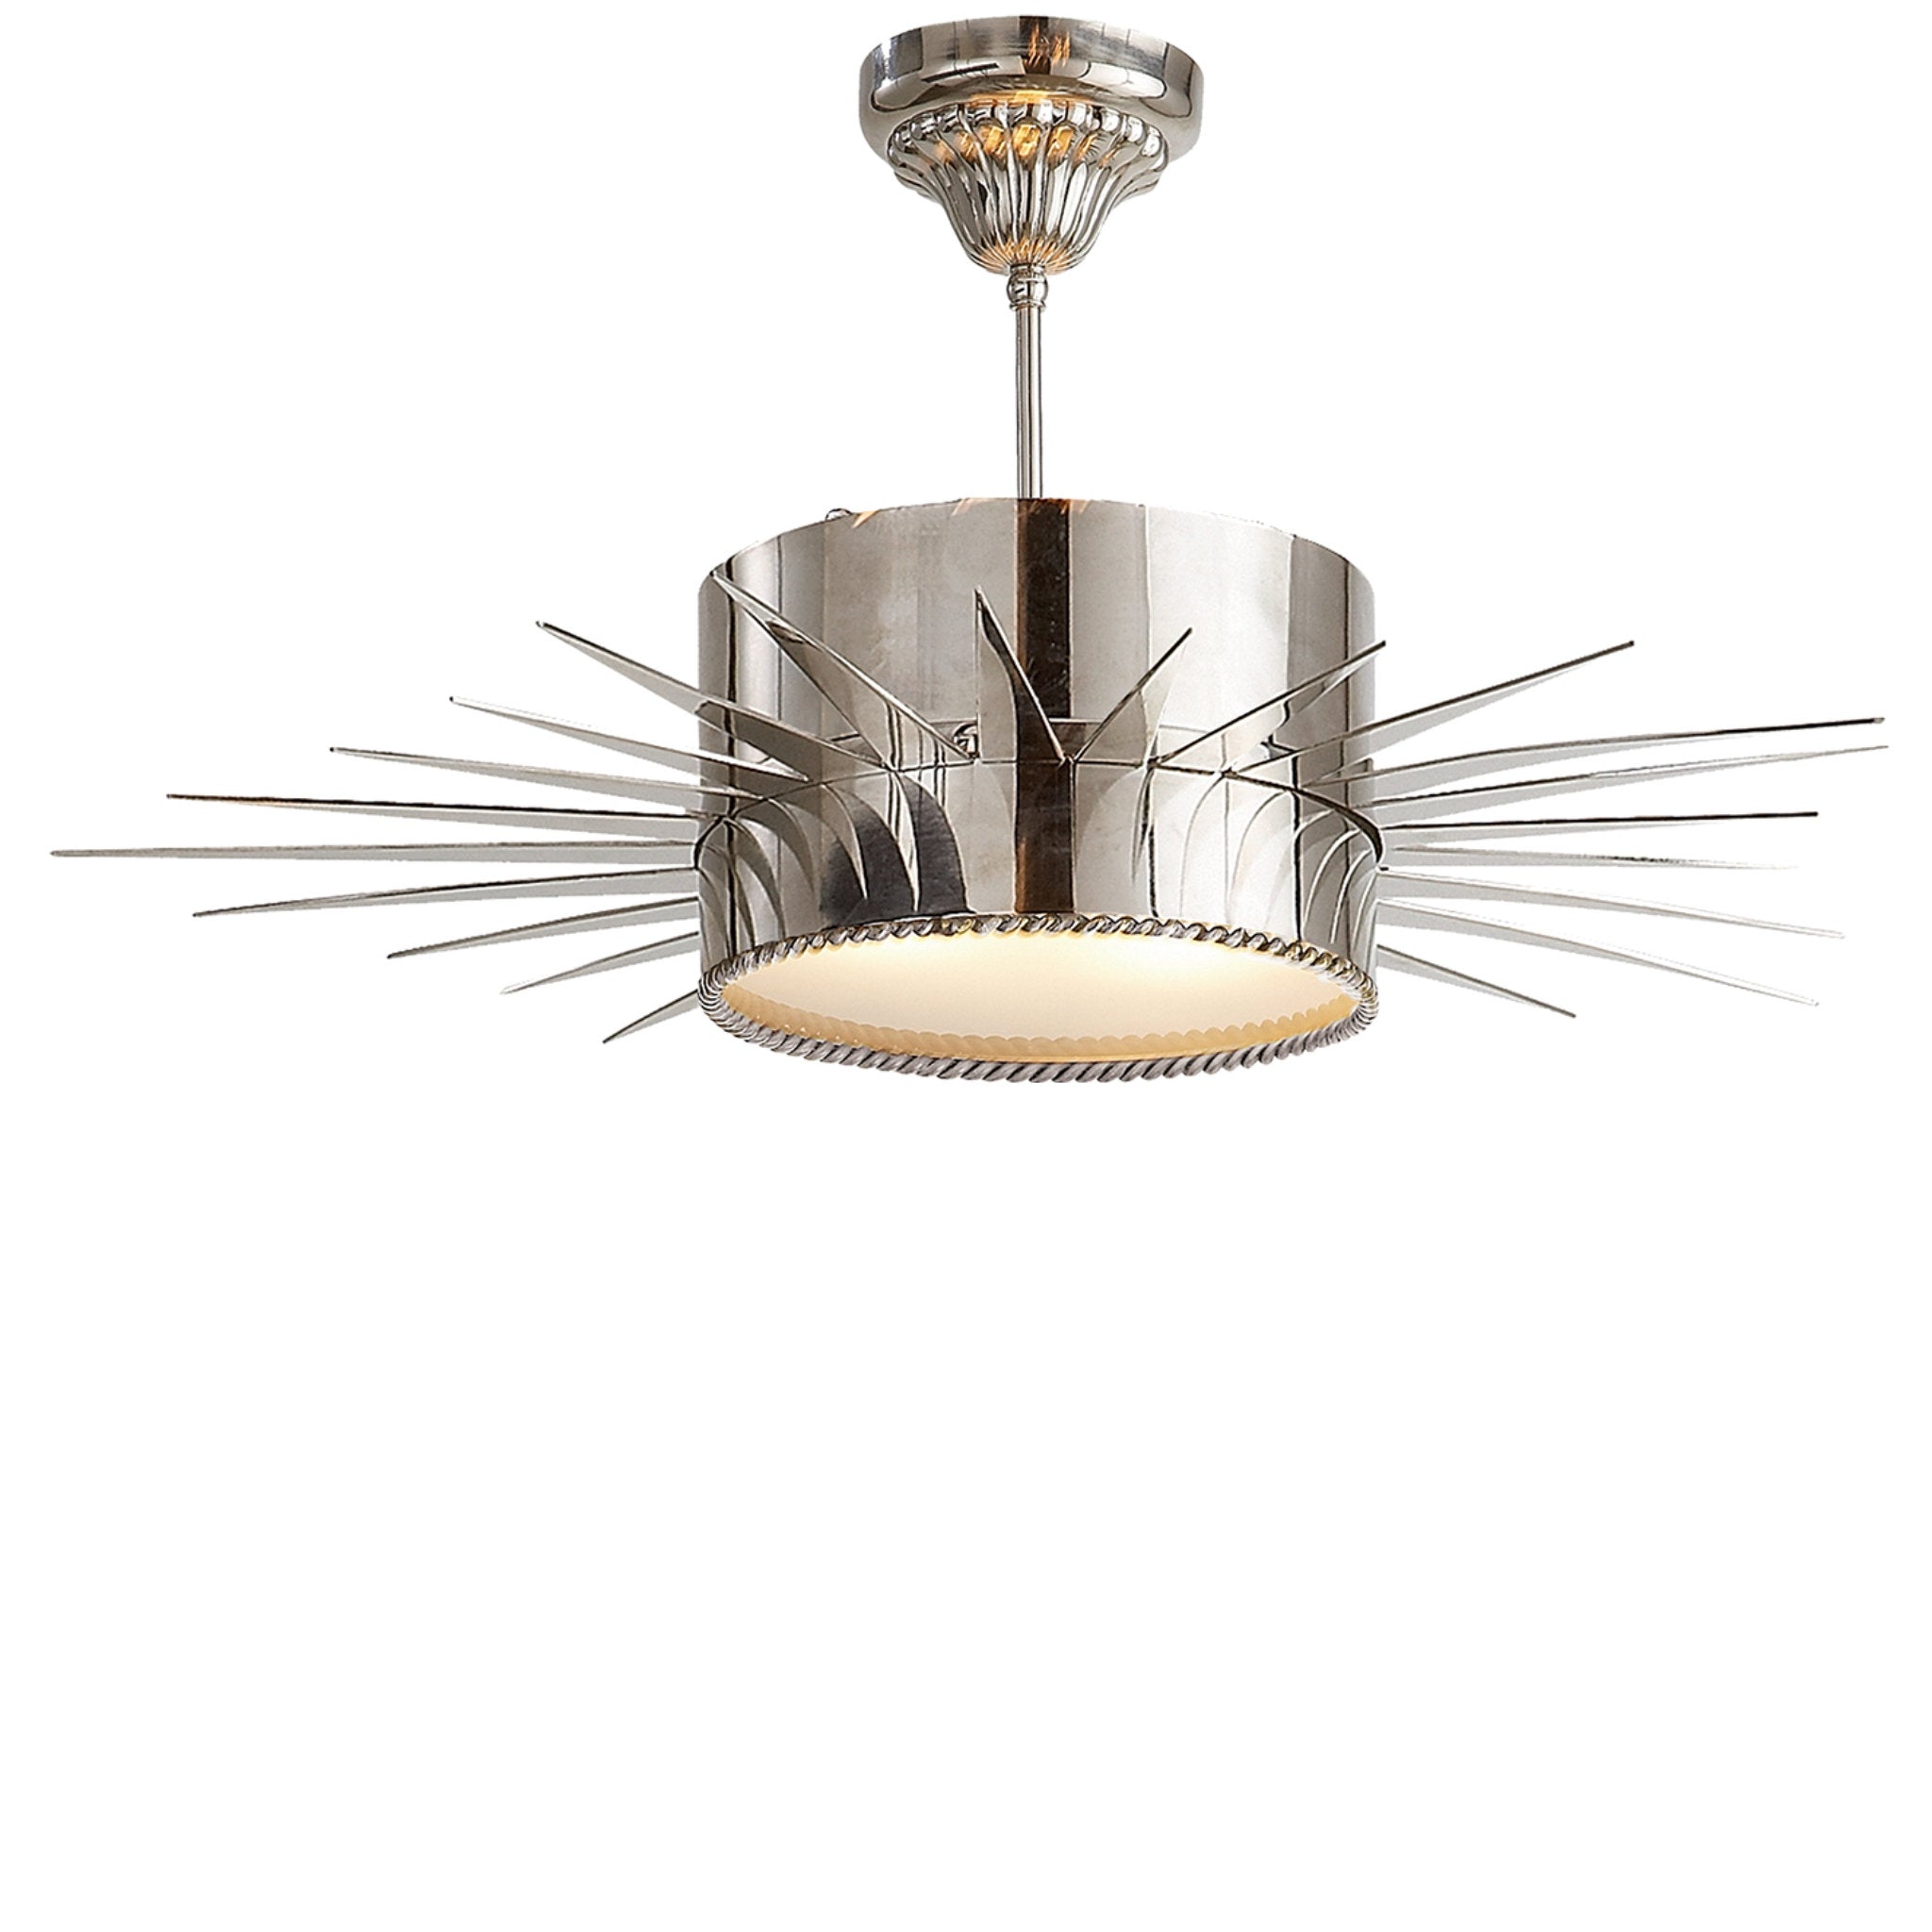 Suzanne Kasler Soleil Large Semi-Flush in Polished Nickel with Frosted Glass